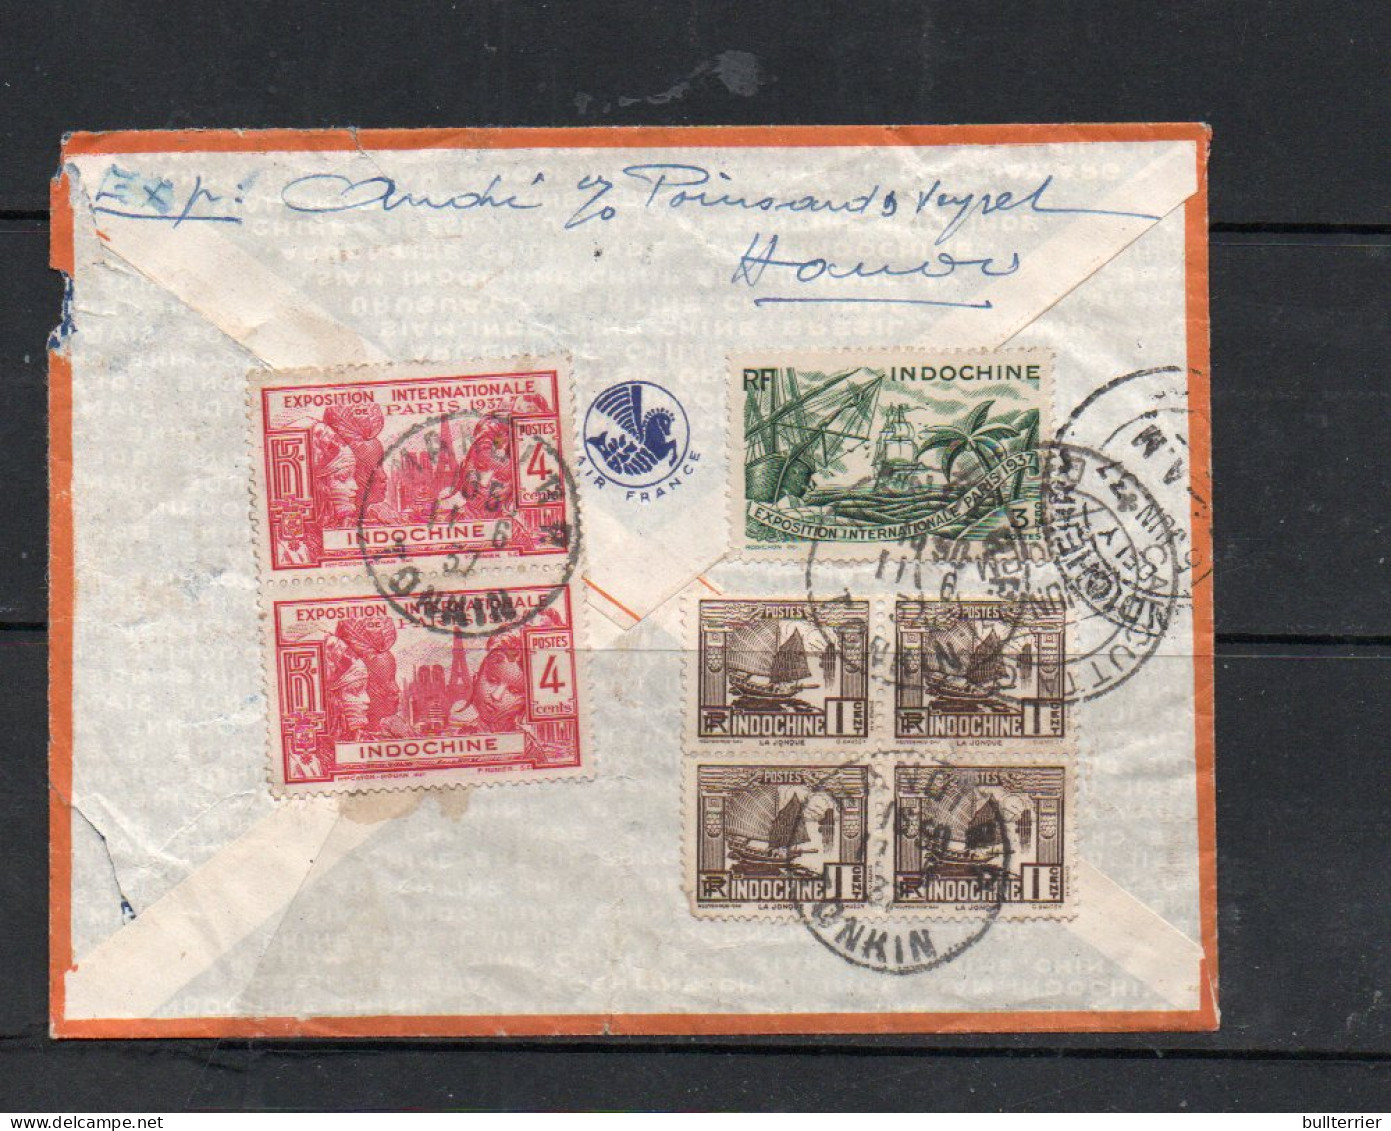 INDOCHINA - 1937 - AIRMAIL COVER HANOI TO PONDICHERRY FRENCH INDIA WITH BACKSTAMPS - Luftpost